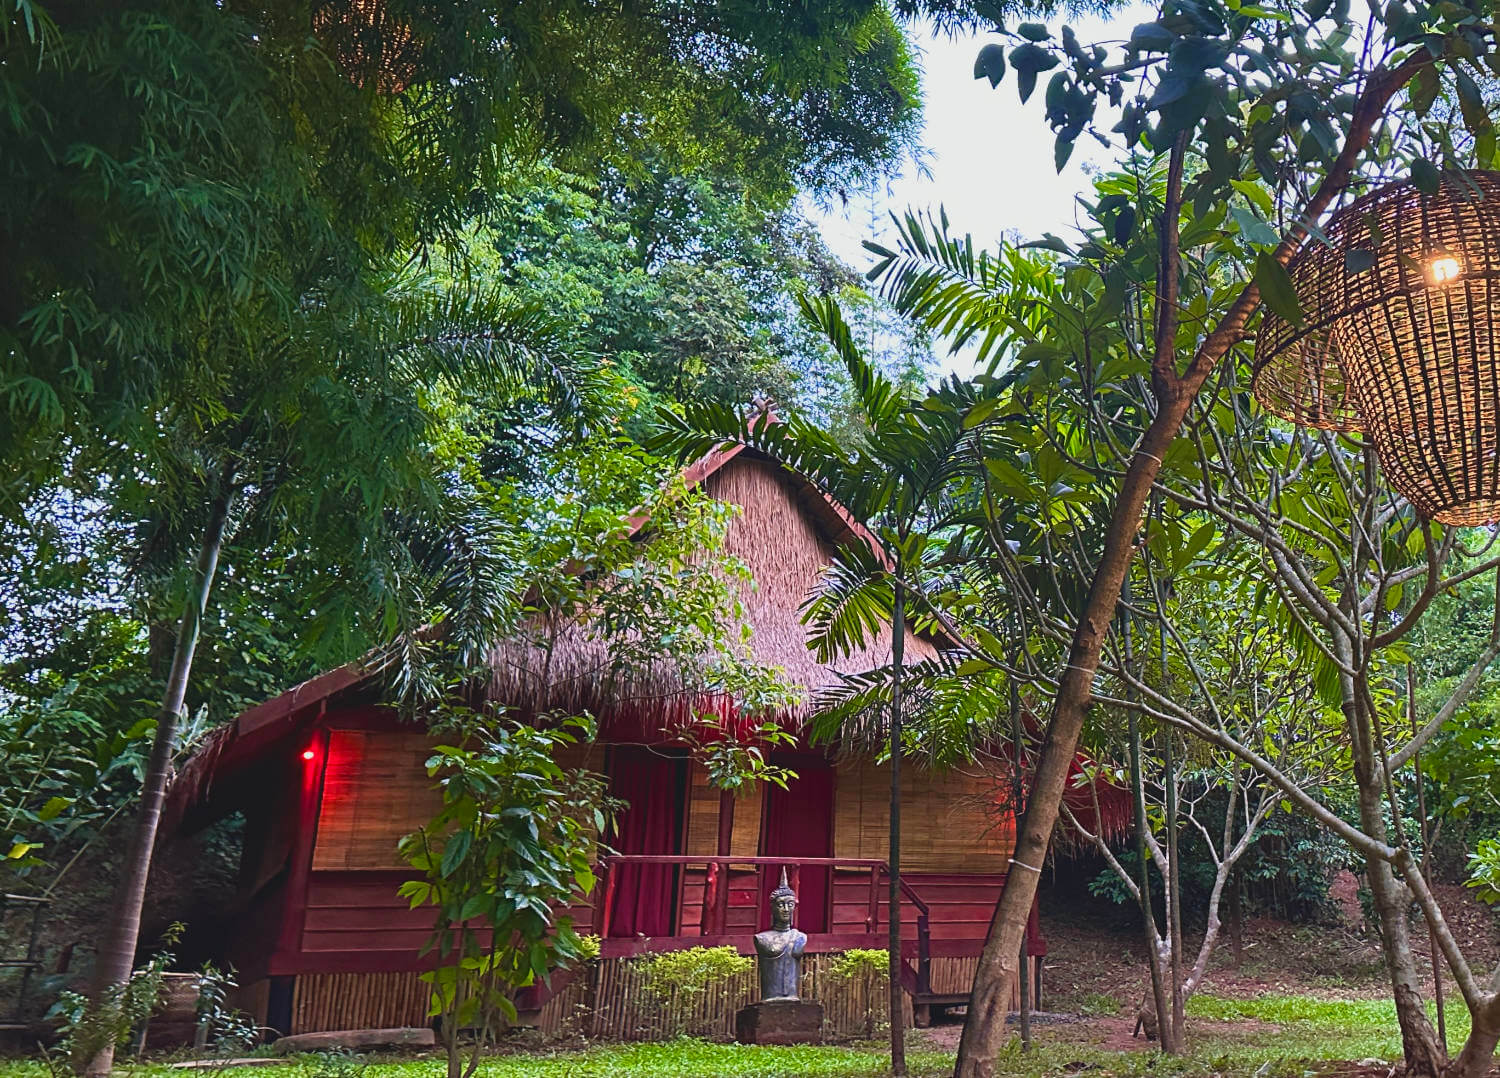 A rustic wooden house nestled in the lush forest of Luang Prabang.